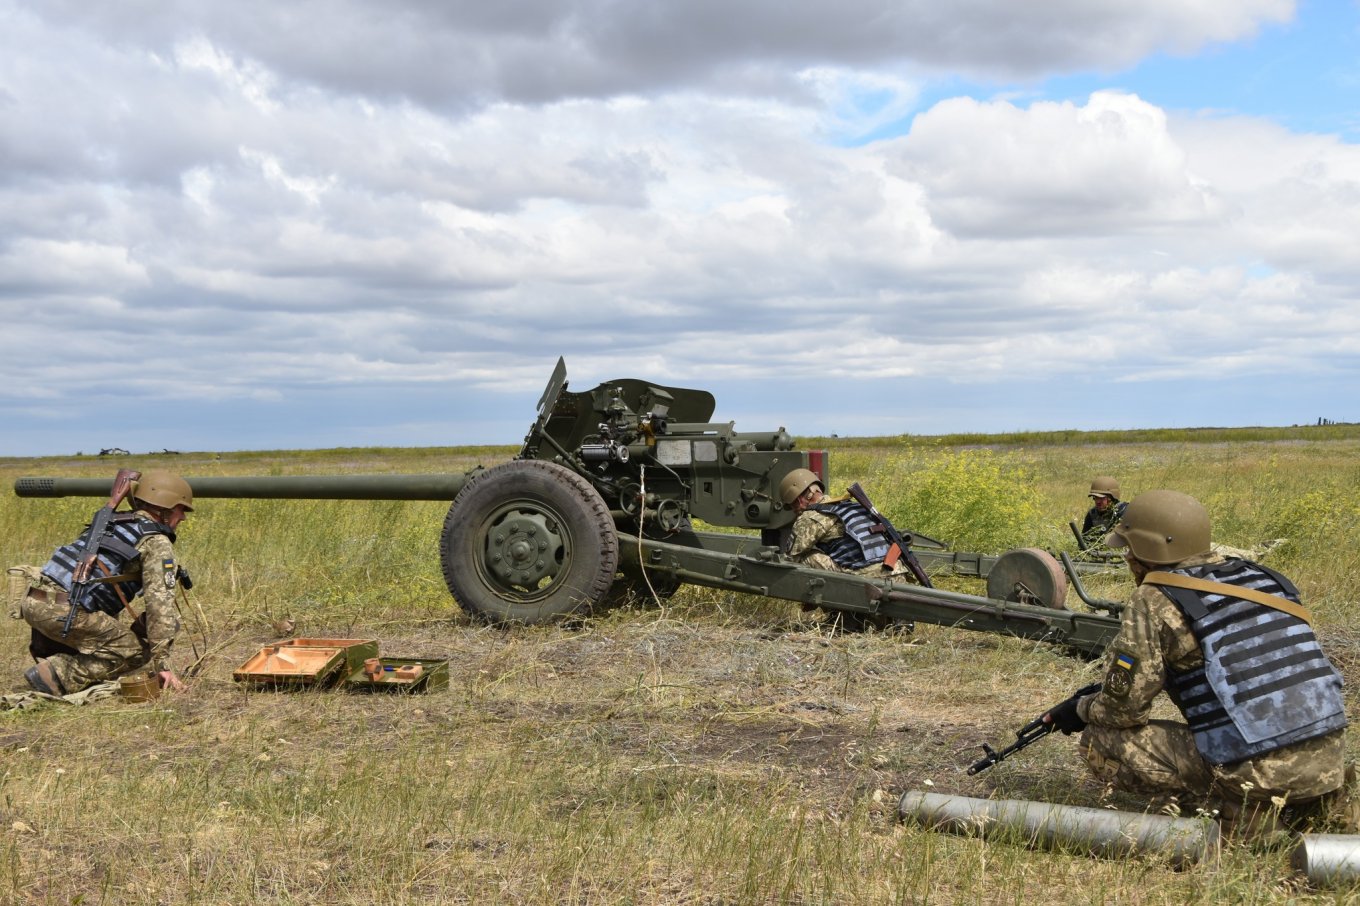 Bulgarian-made ammunition for MT-12 Rapira guns was spotted in Ukrainian frontlines